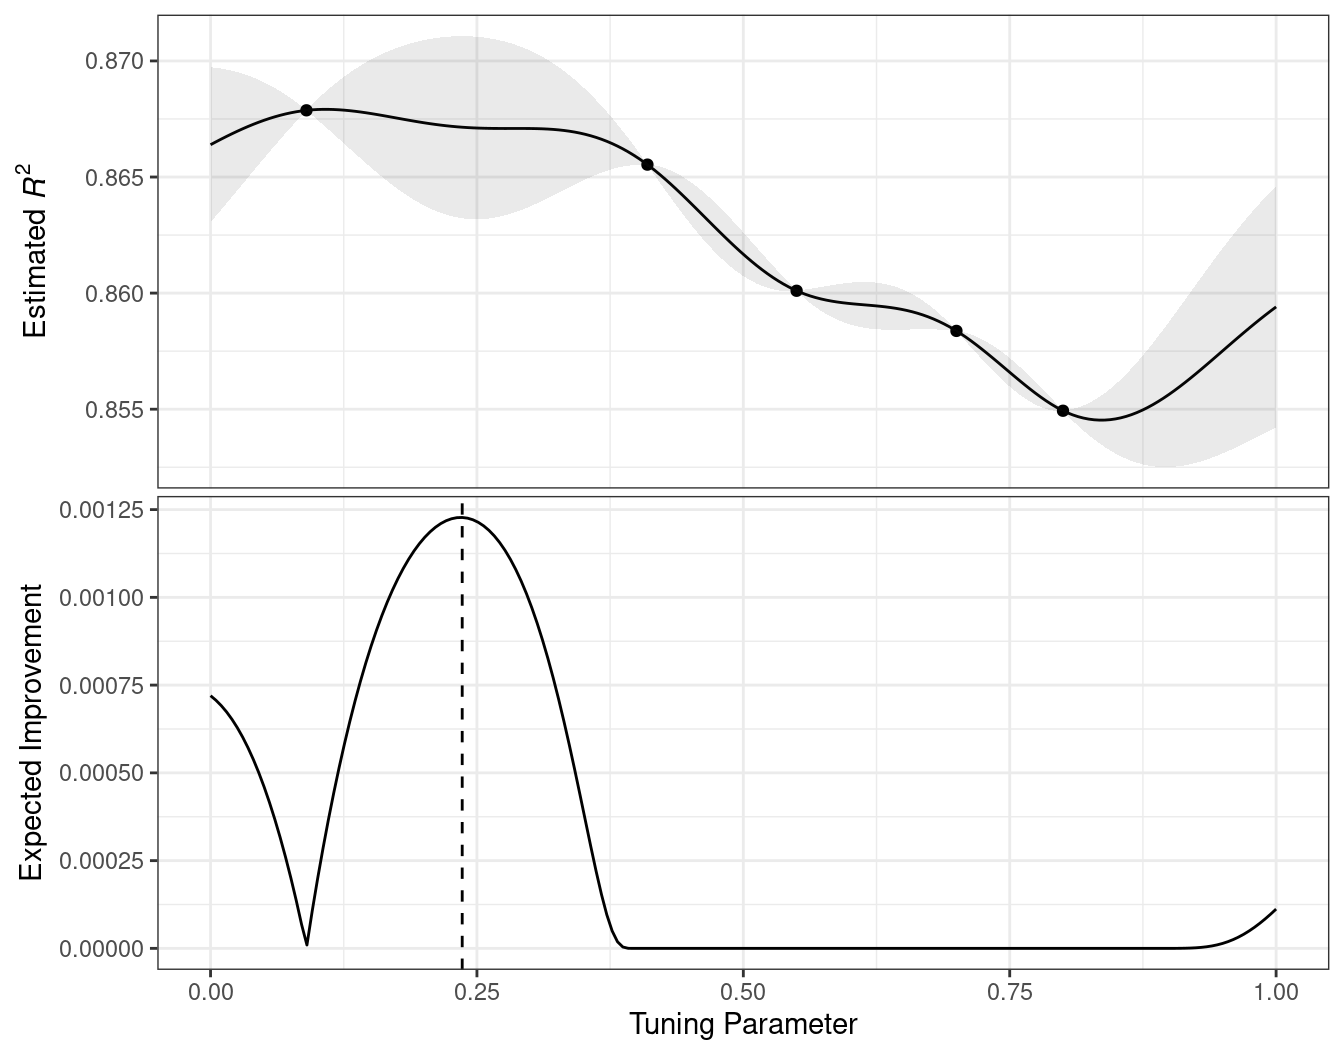 The estimated performance profile generated by the Gaussian process model (top panel) and the expected improvement (bottom panel). The vertical line indicates the point of maximum improvement where estimated performance is high and the predicted variation is also large.